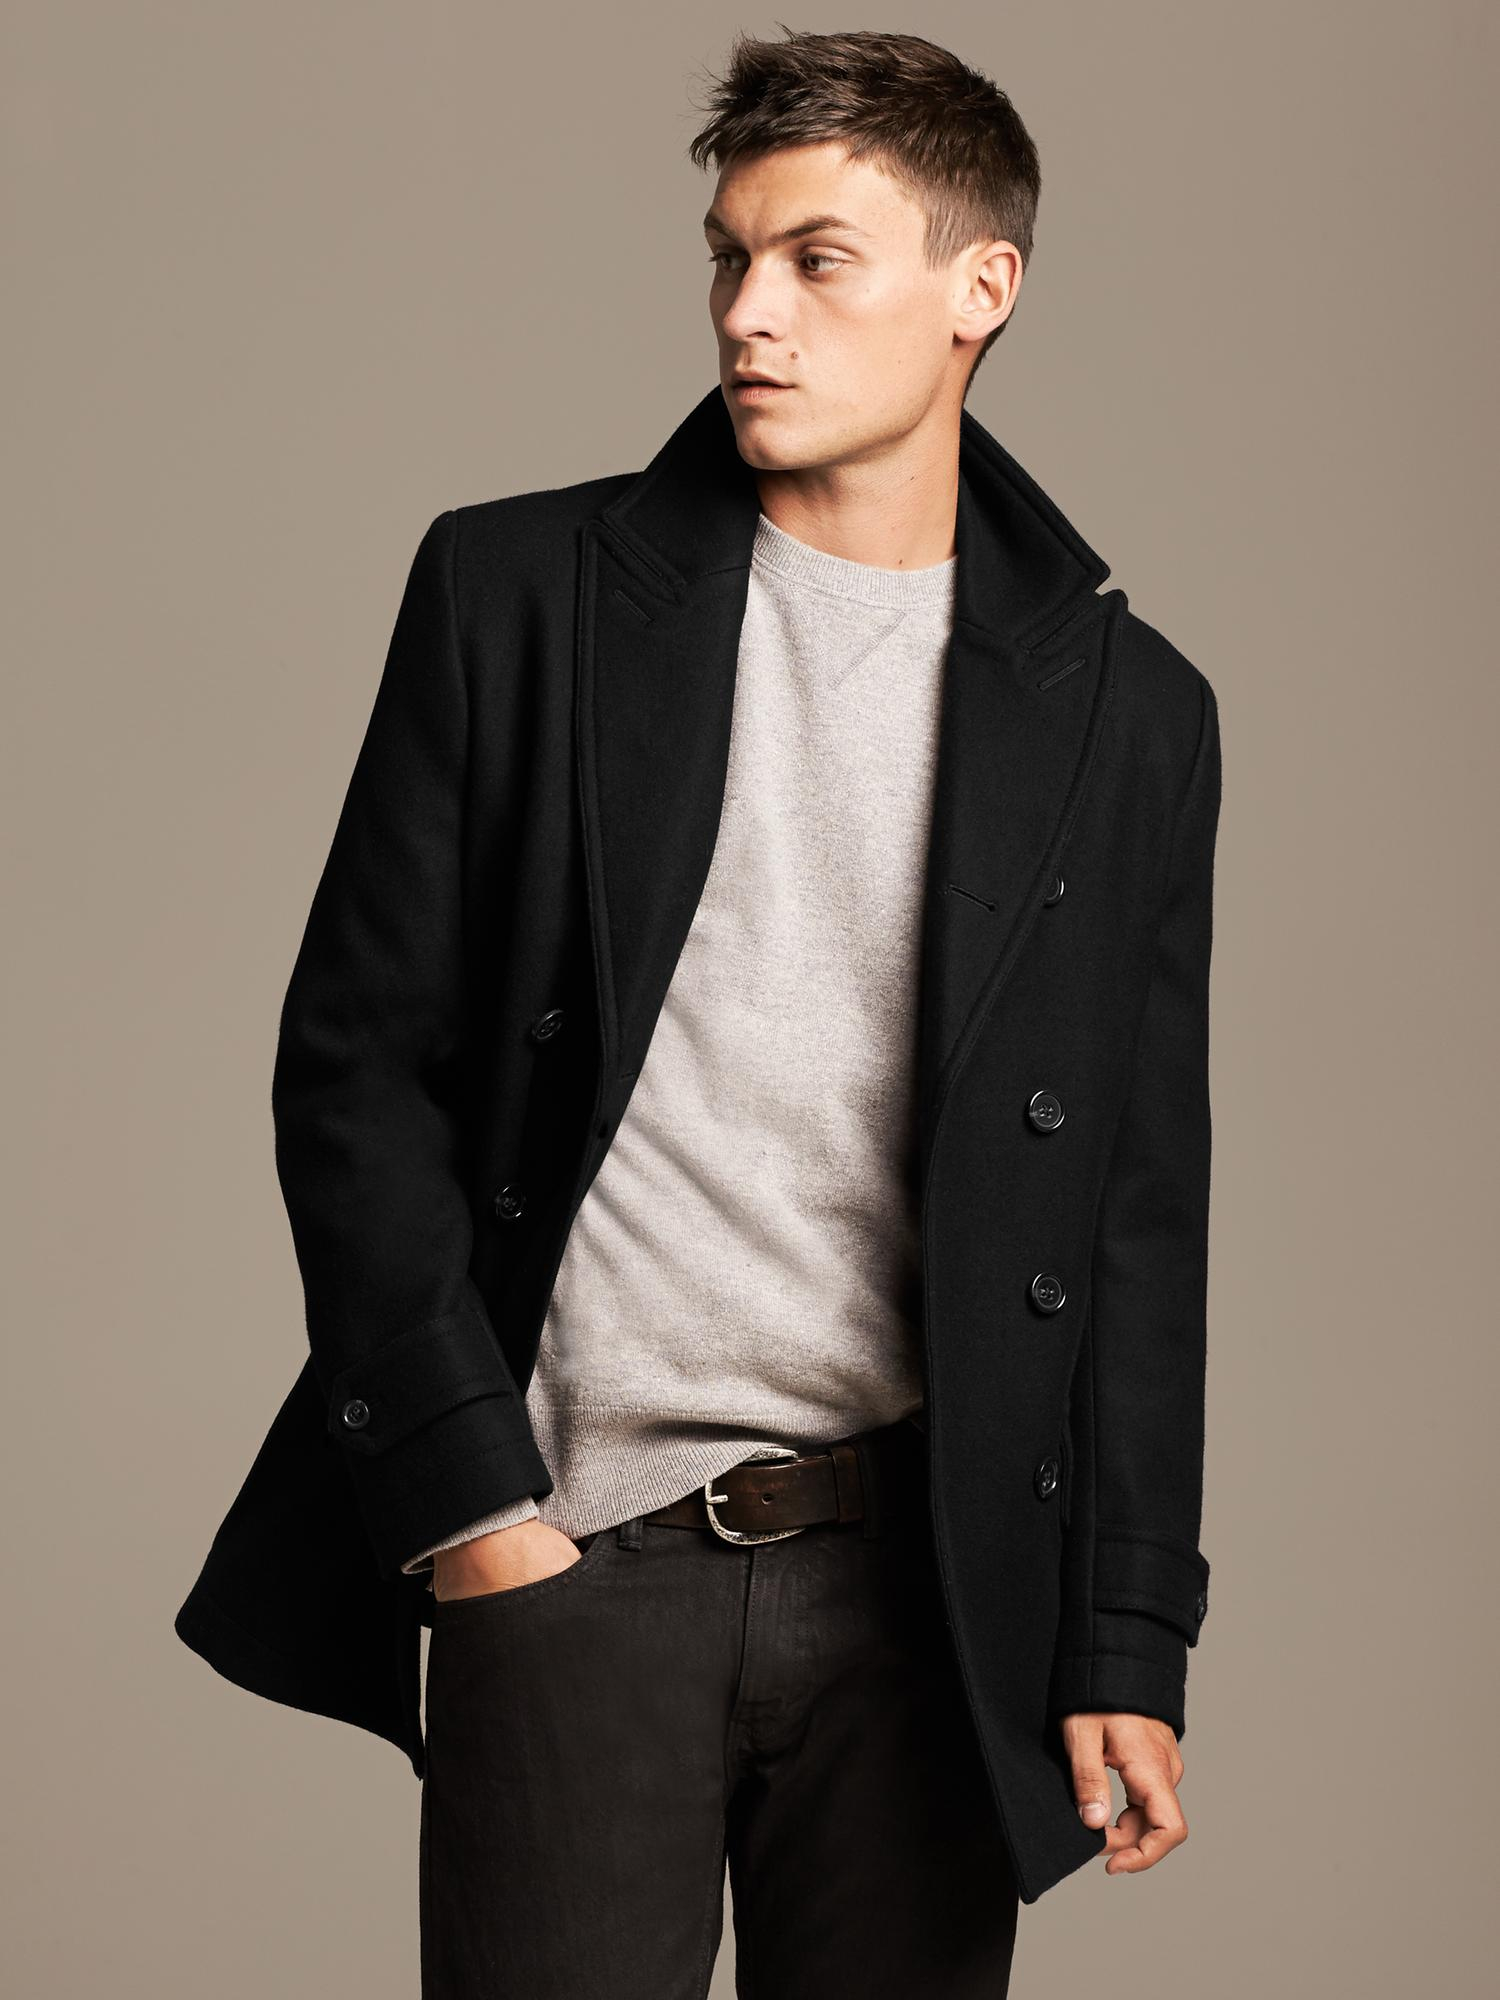 Collection Peacoat Mens Pictures - Reikian